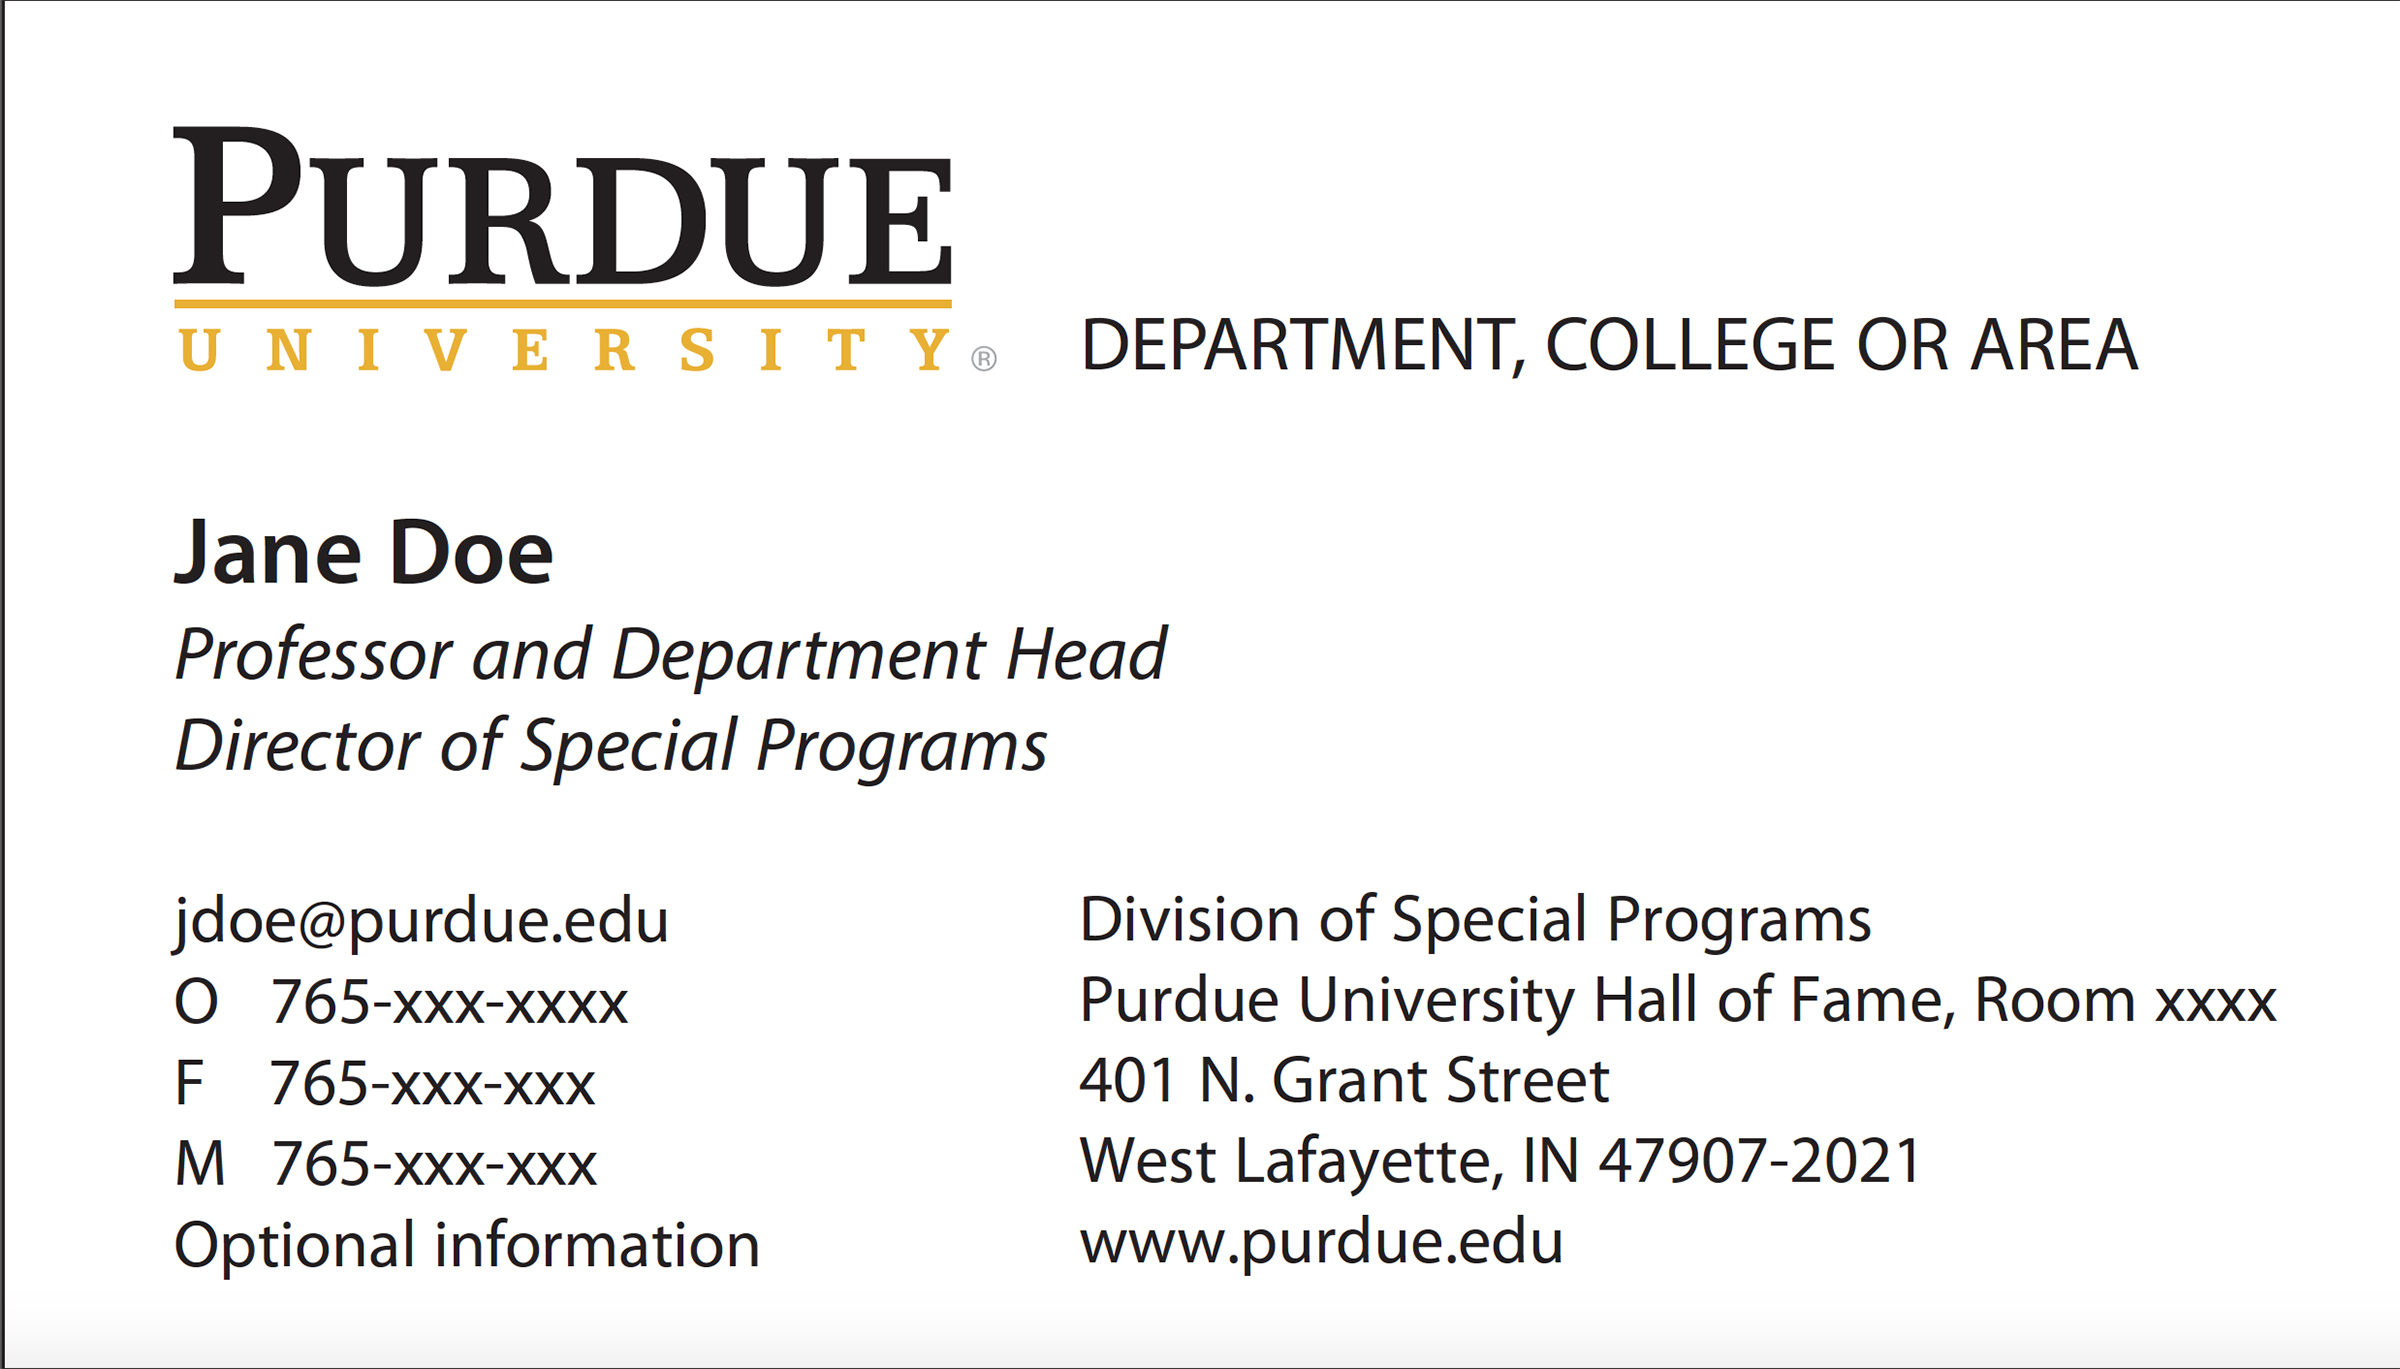 New Business Card Template Now Online – Purdue University News With Graduate Student Business Cards Template